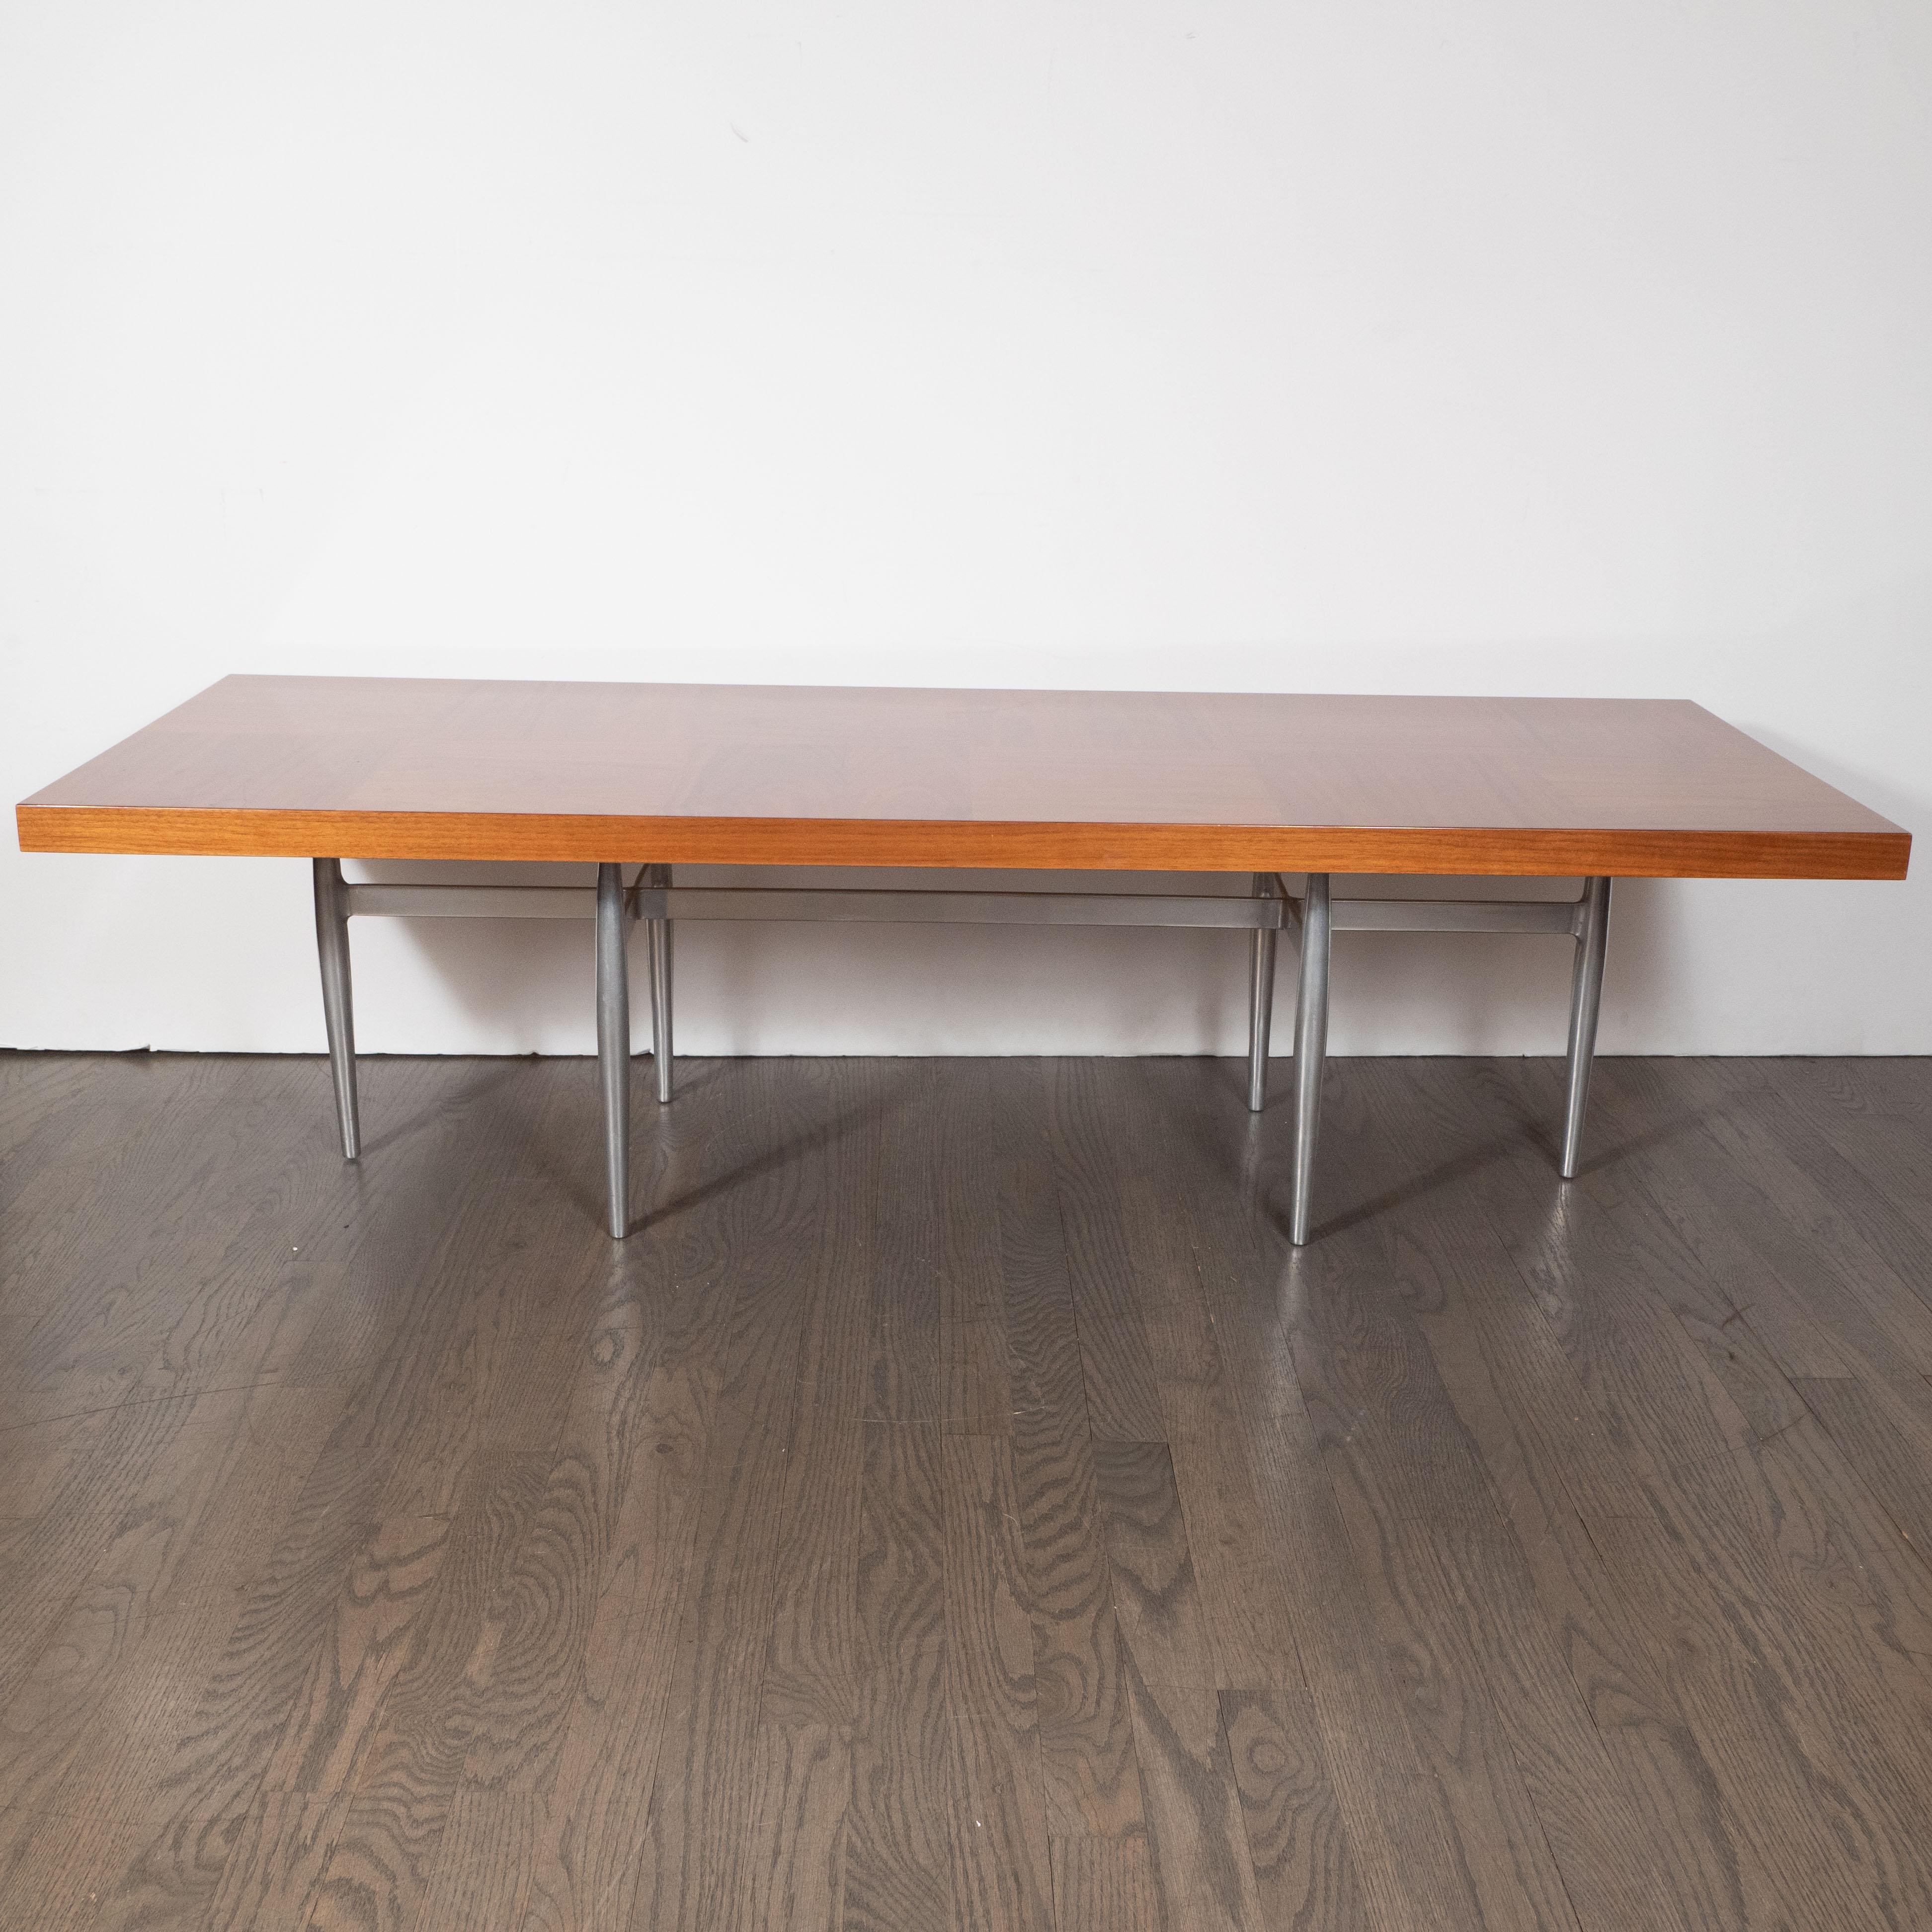 American Midcentury Cocktail Table, Bookmatched Walnut Top and Sculptural Aluminum Base